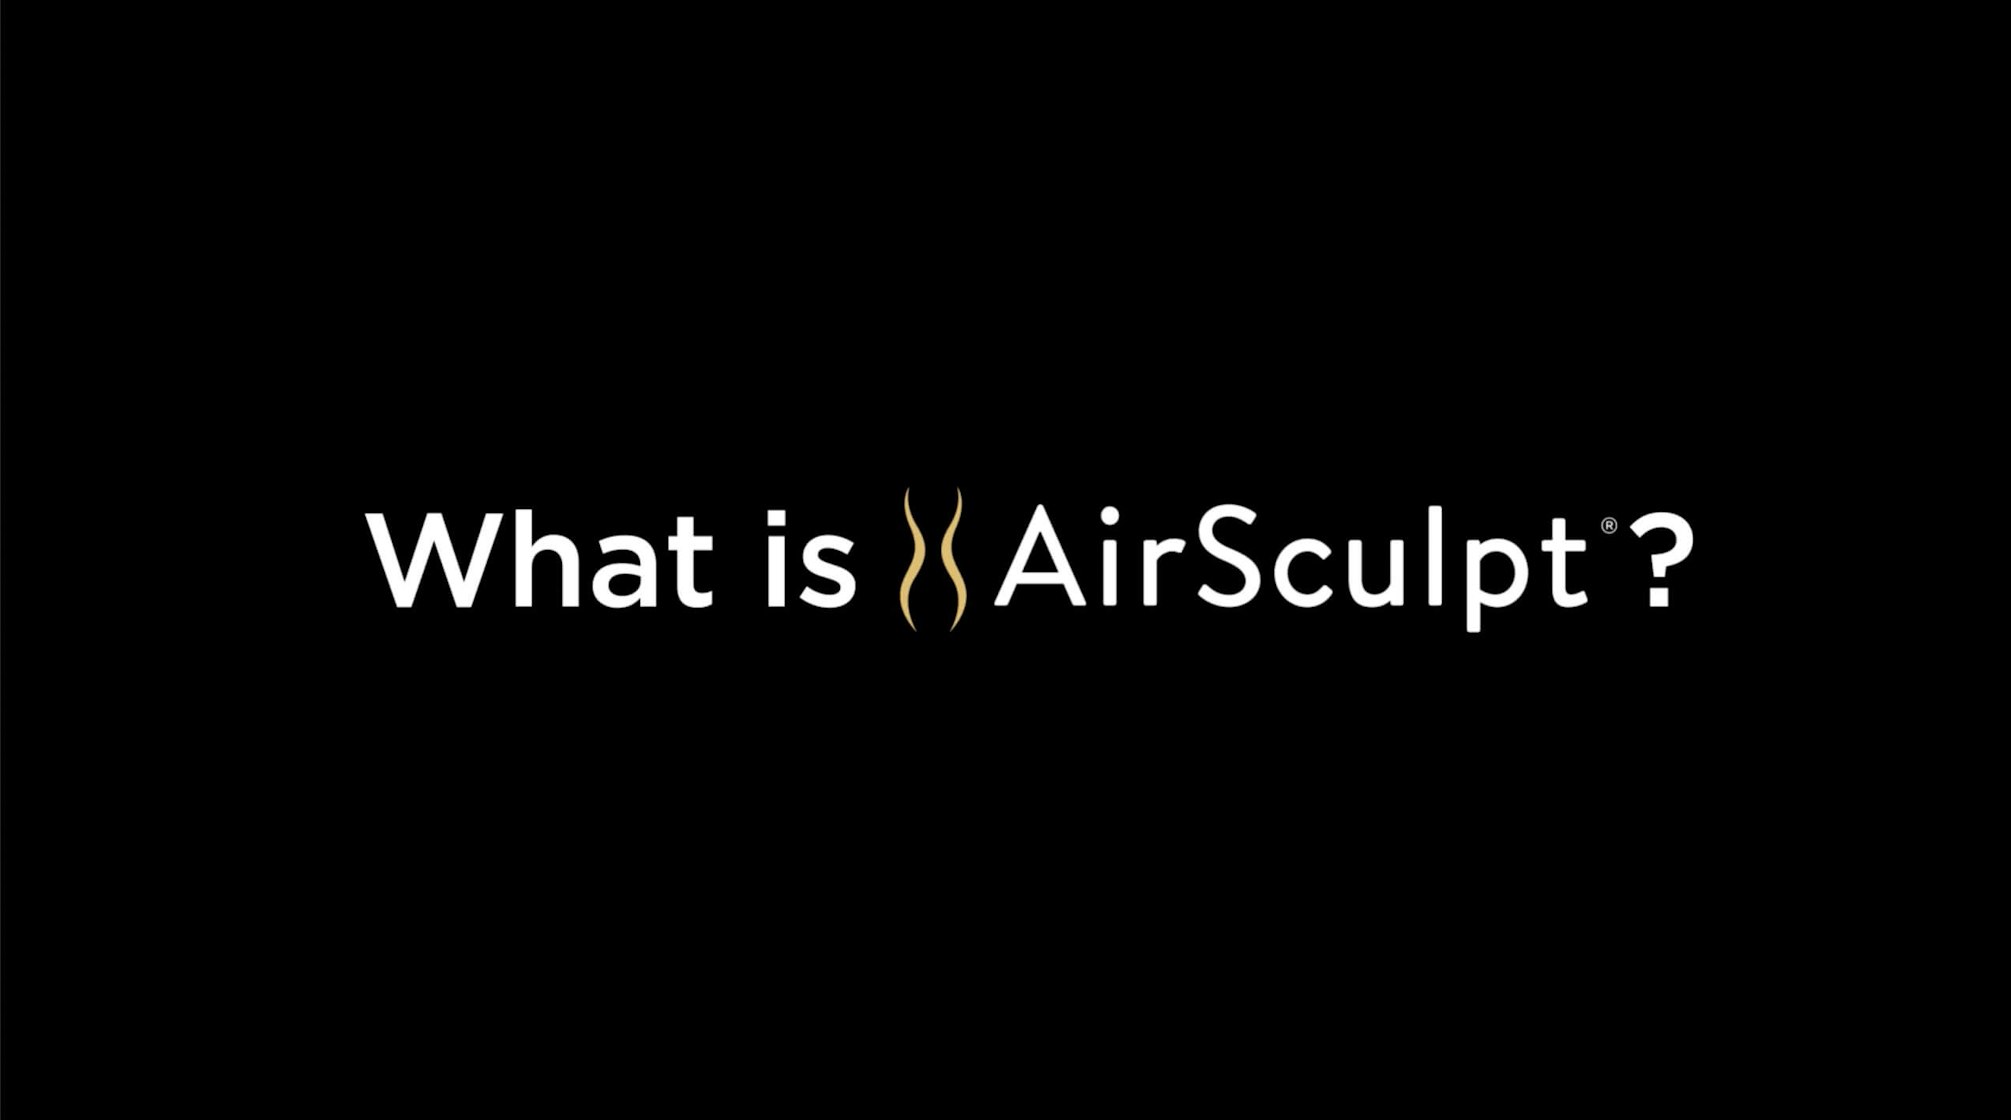 What is AirSculpt?